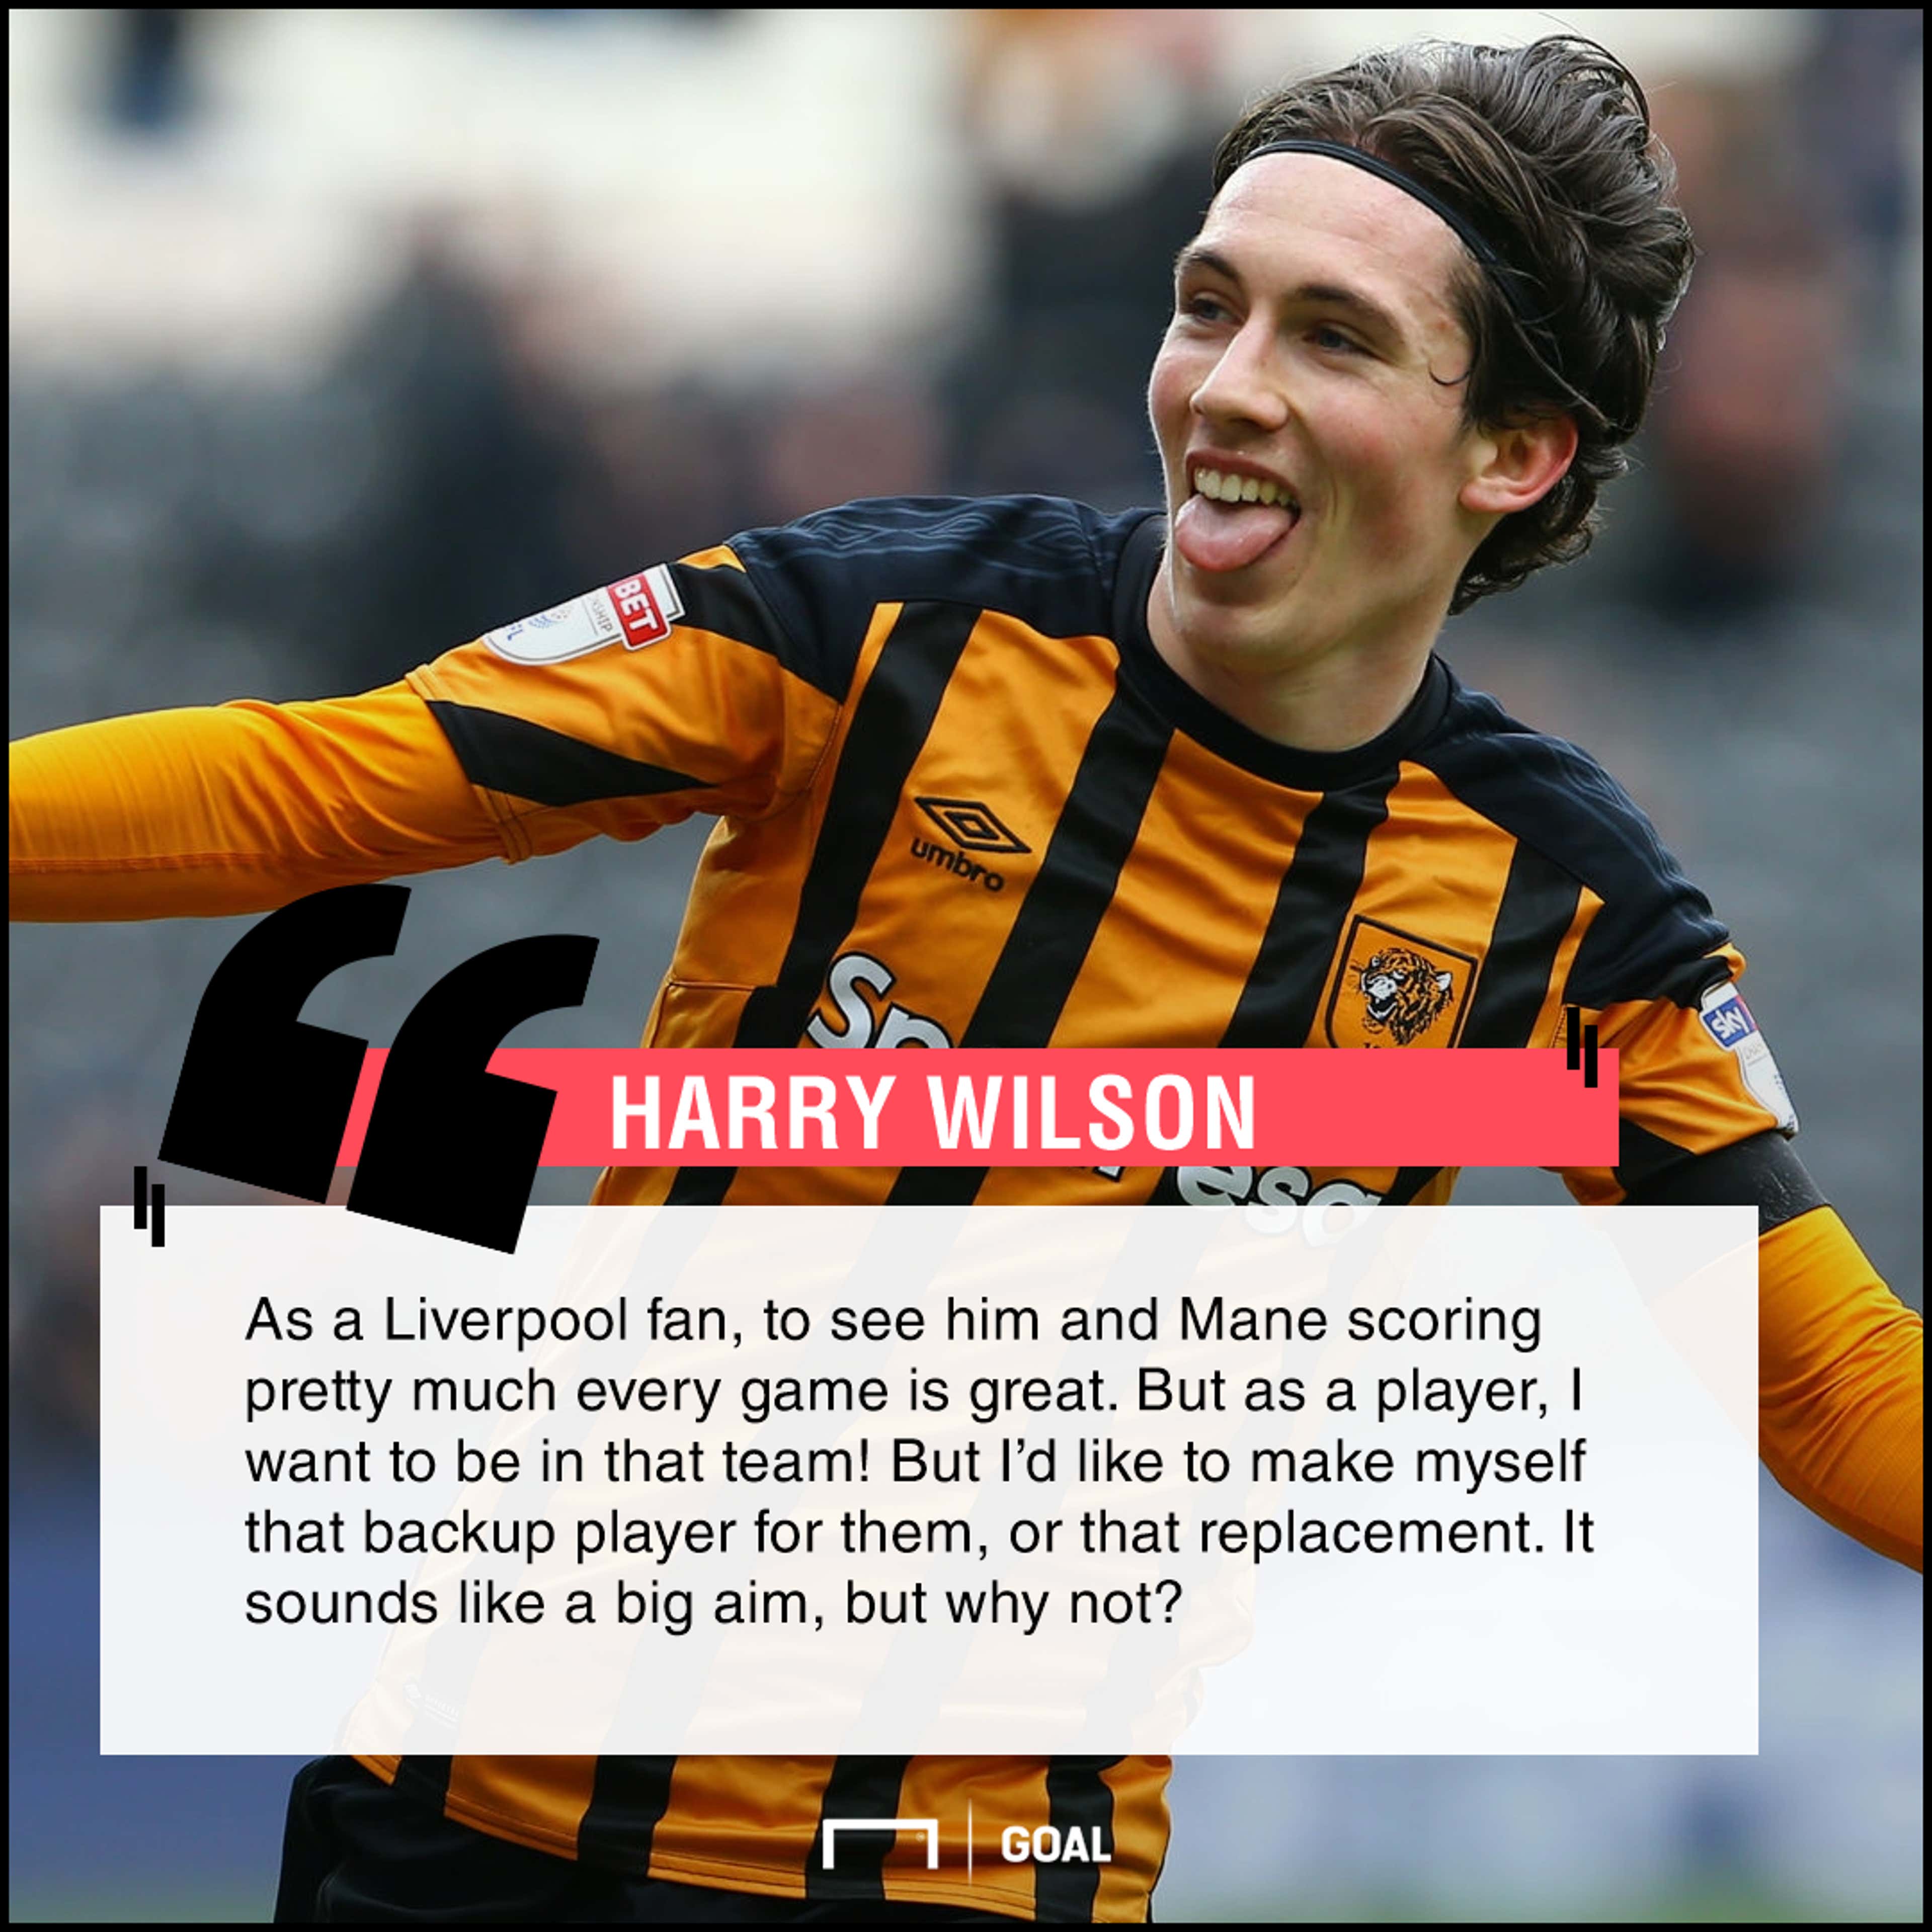 Harry Wilson on his Liverpool first team ambition